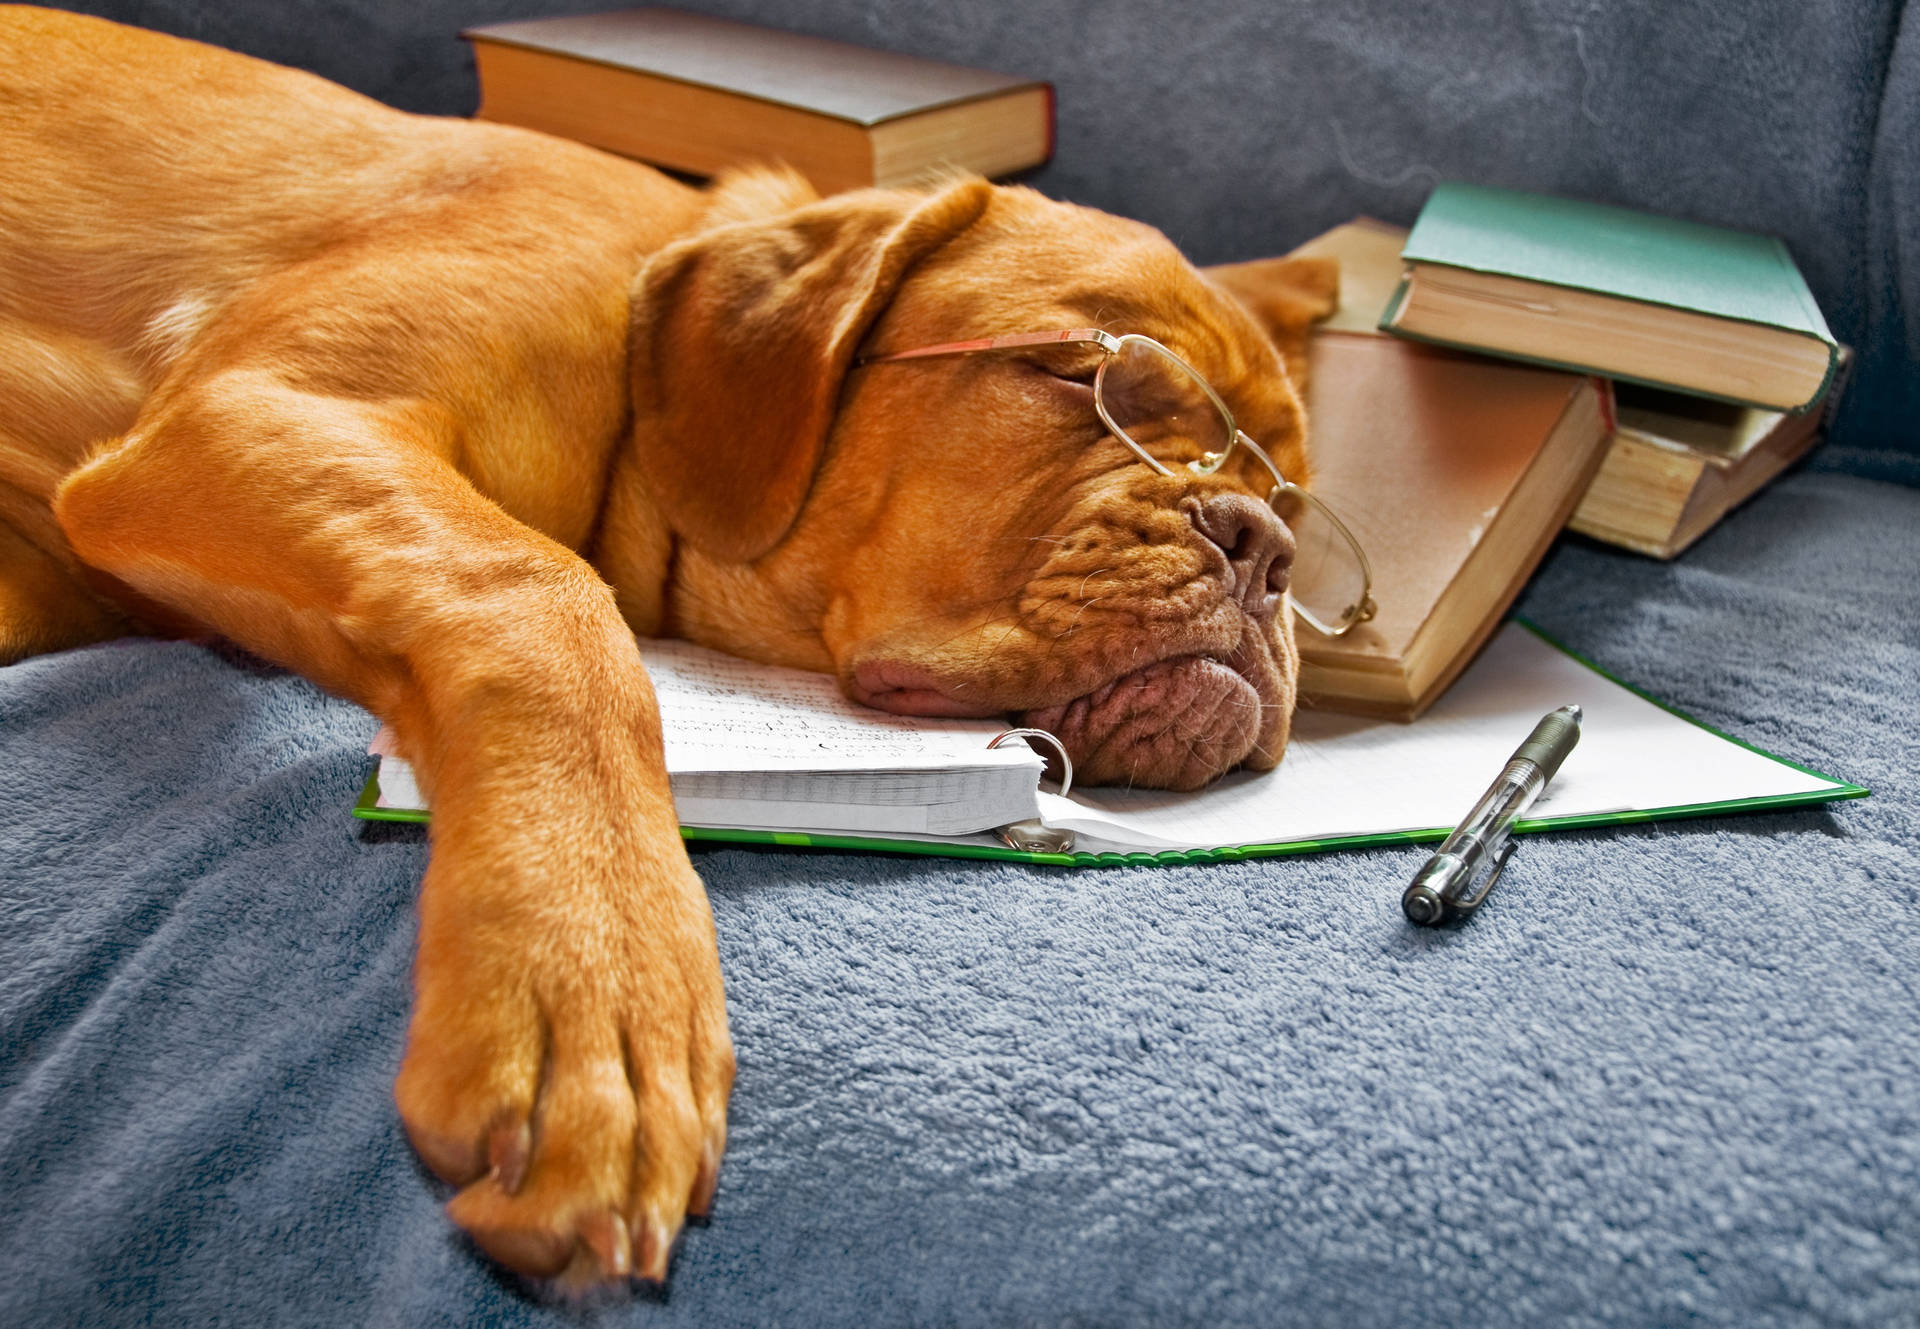 Bookworm Dog Napping